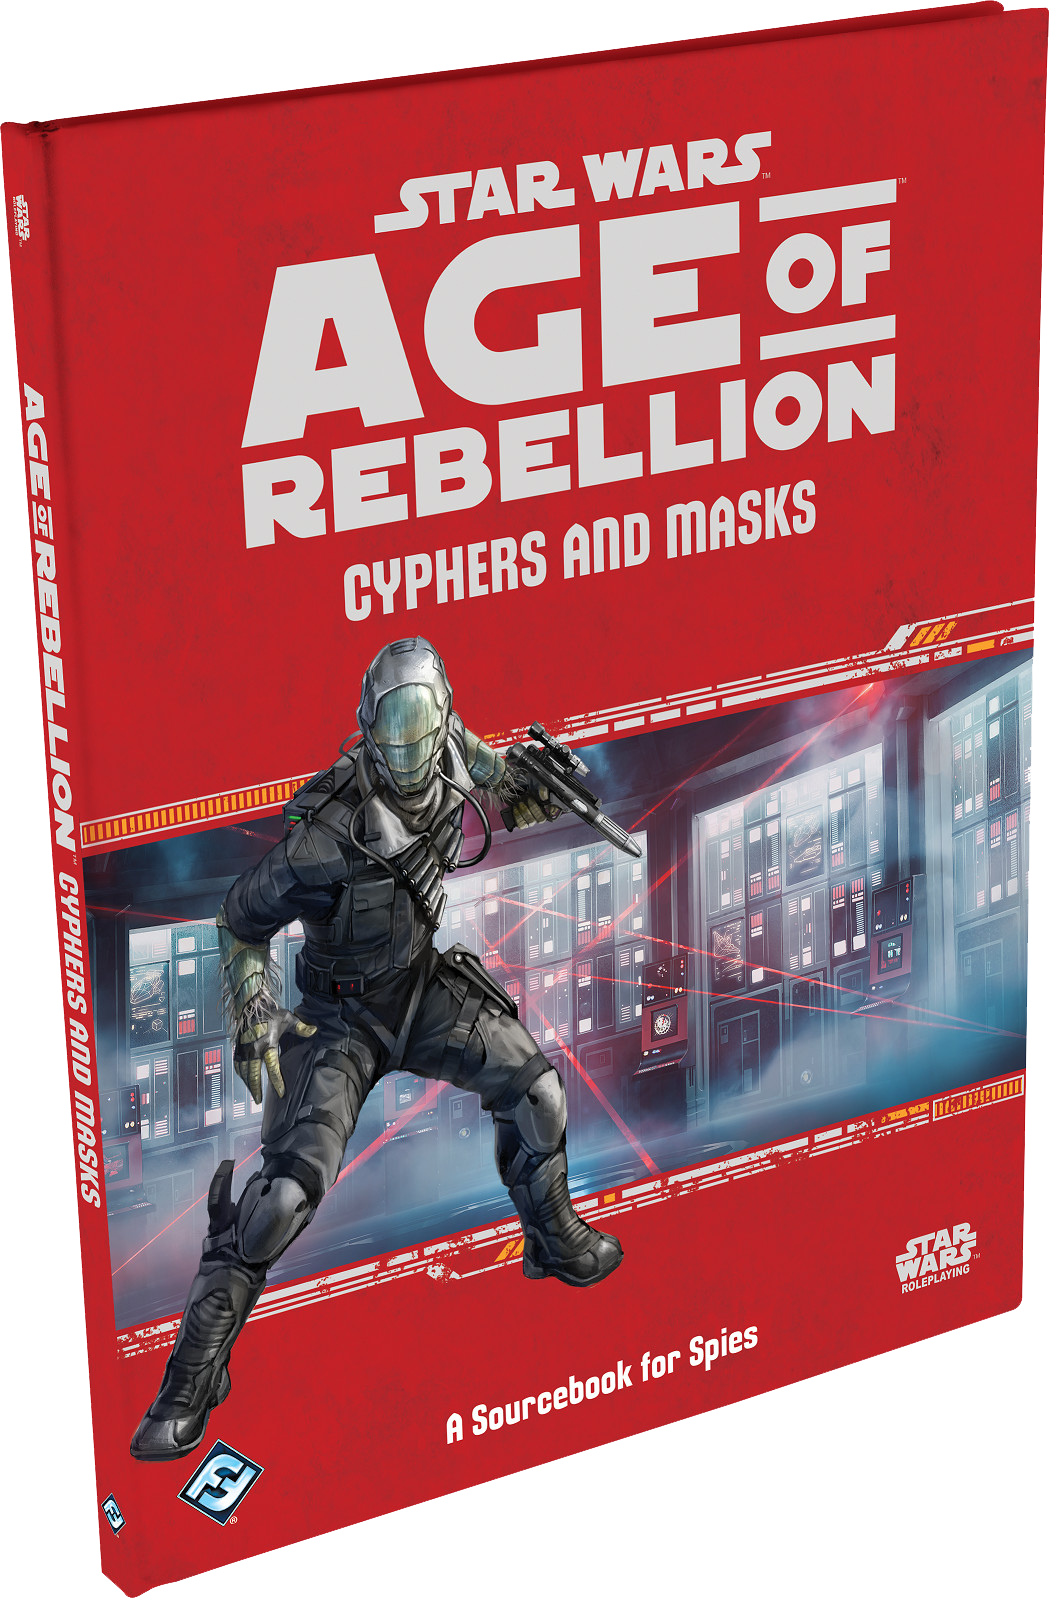 Star Wars: Age of Rebellion Cyphers & Masks